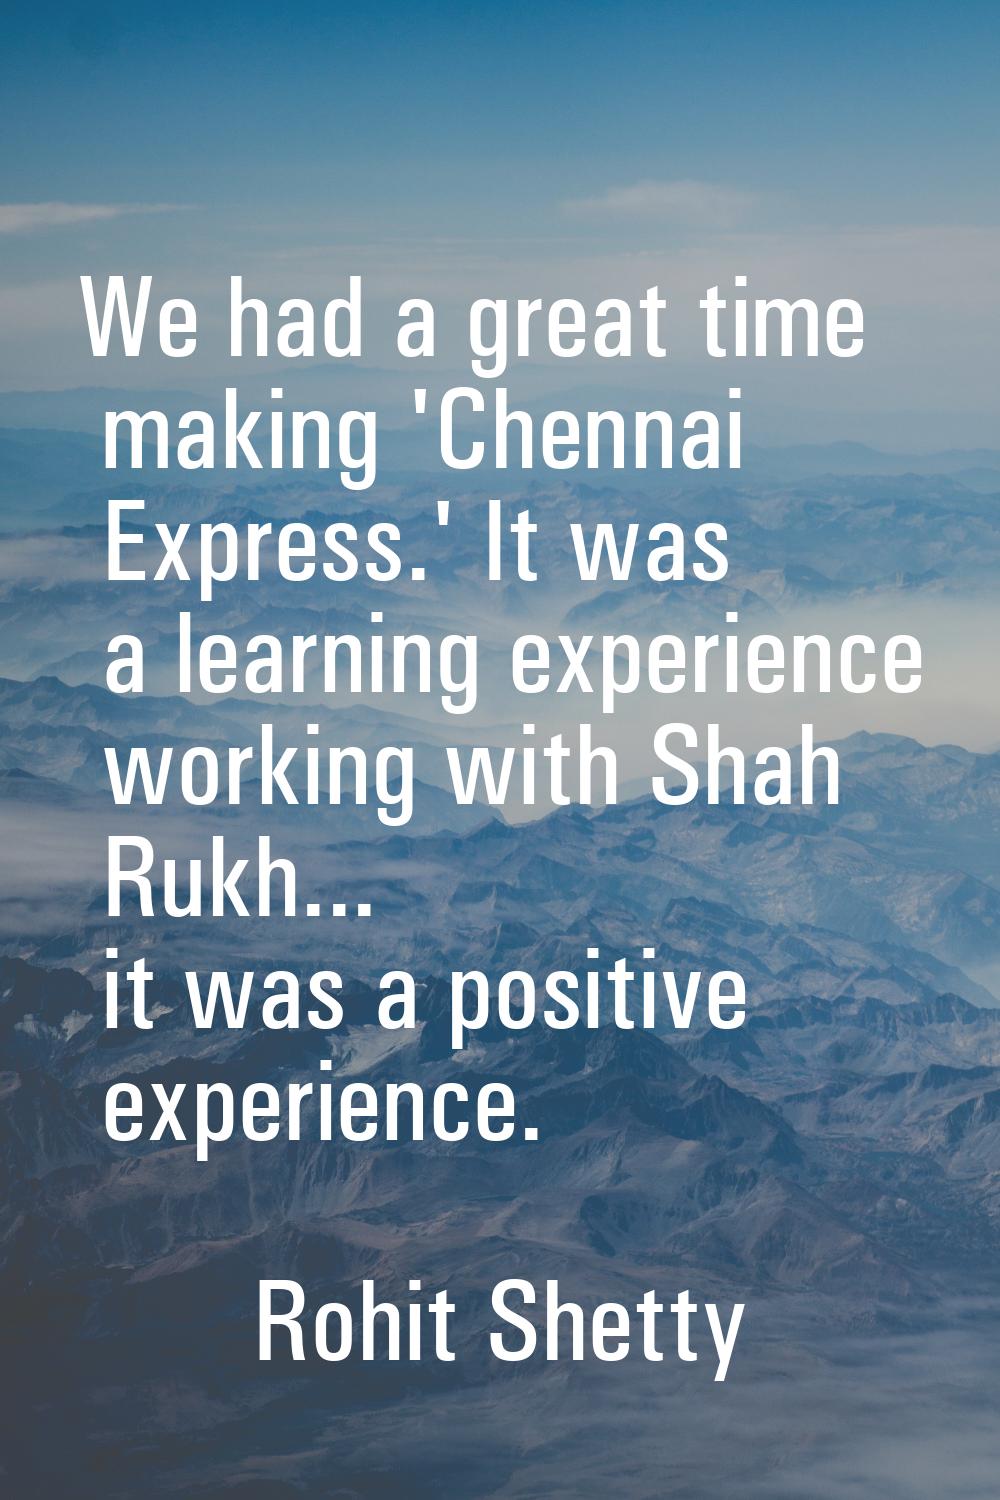 We had a great time making 'Chennai Express.' It was a learning experience working with Shah Rukh..